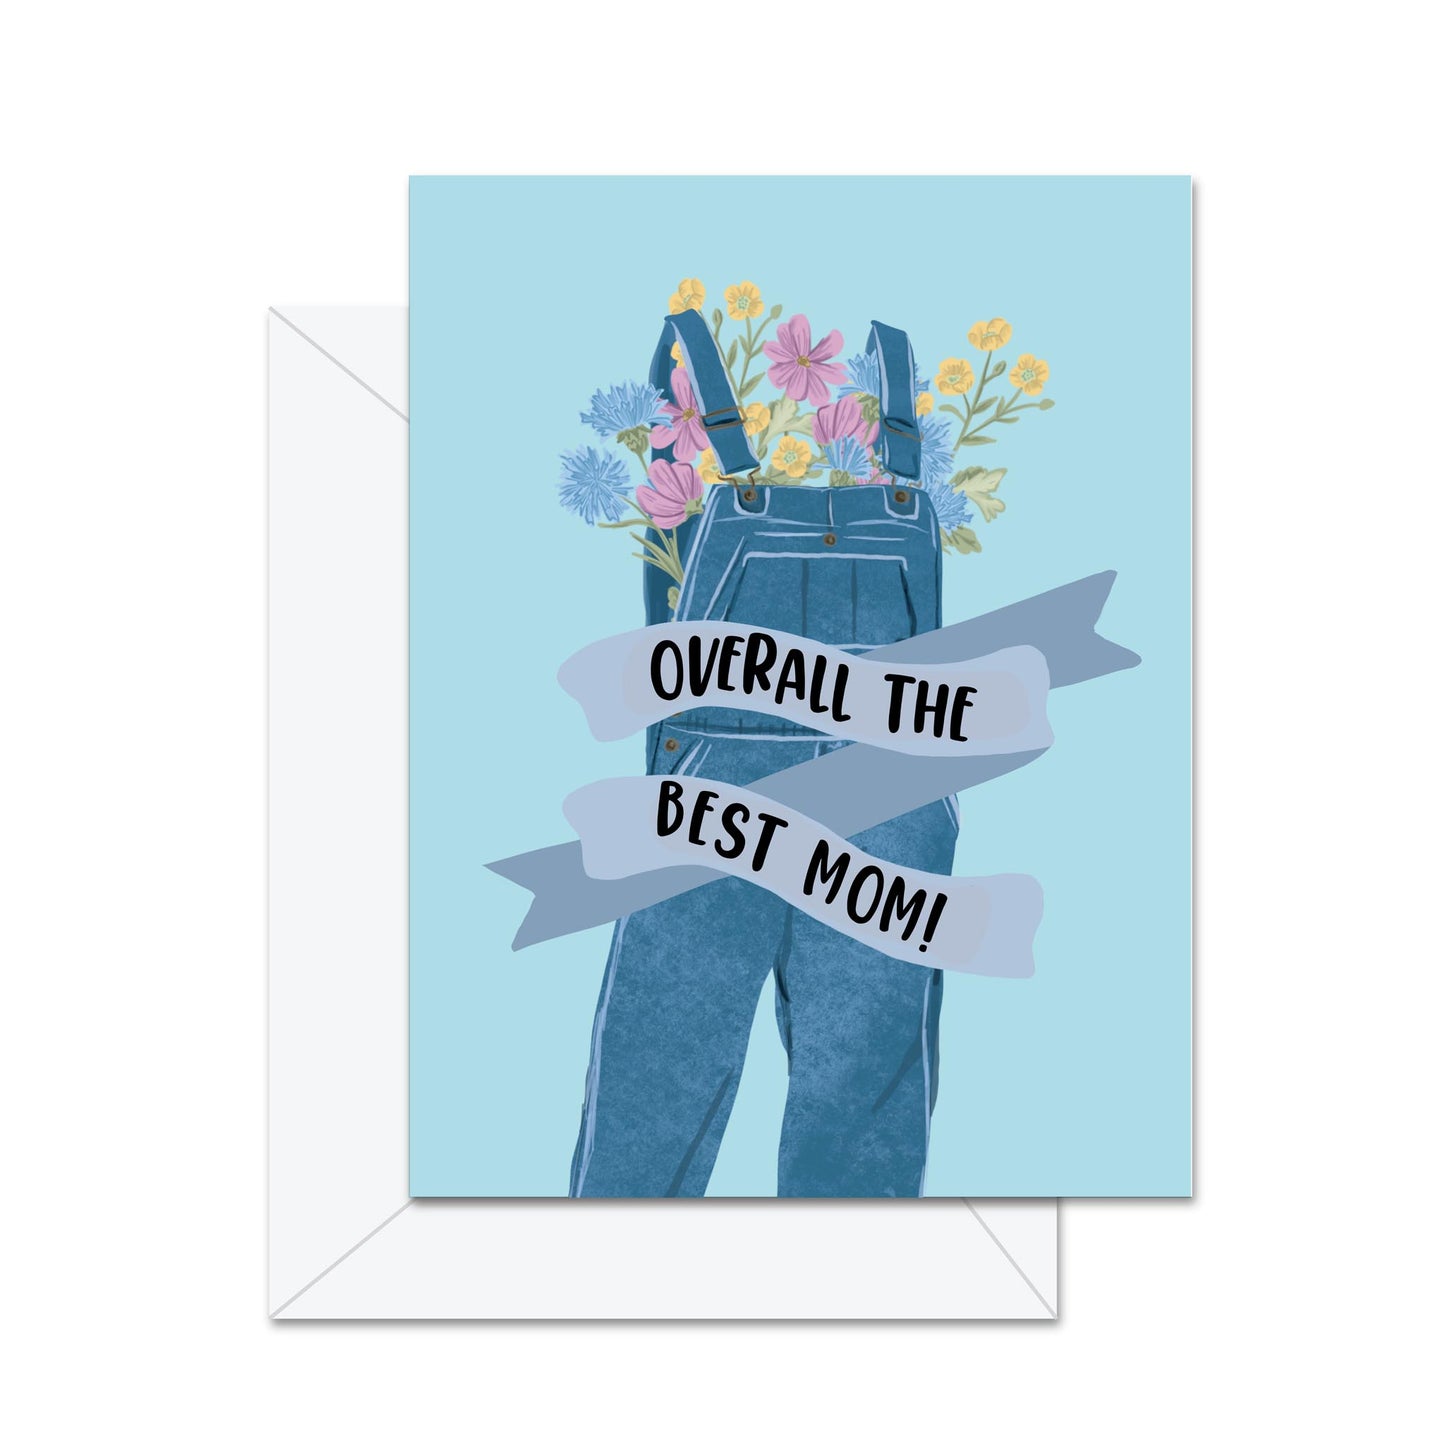 Overall The Best Mom! - Greeting Card